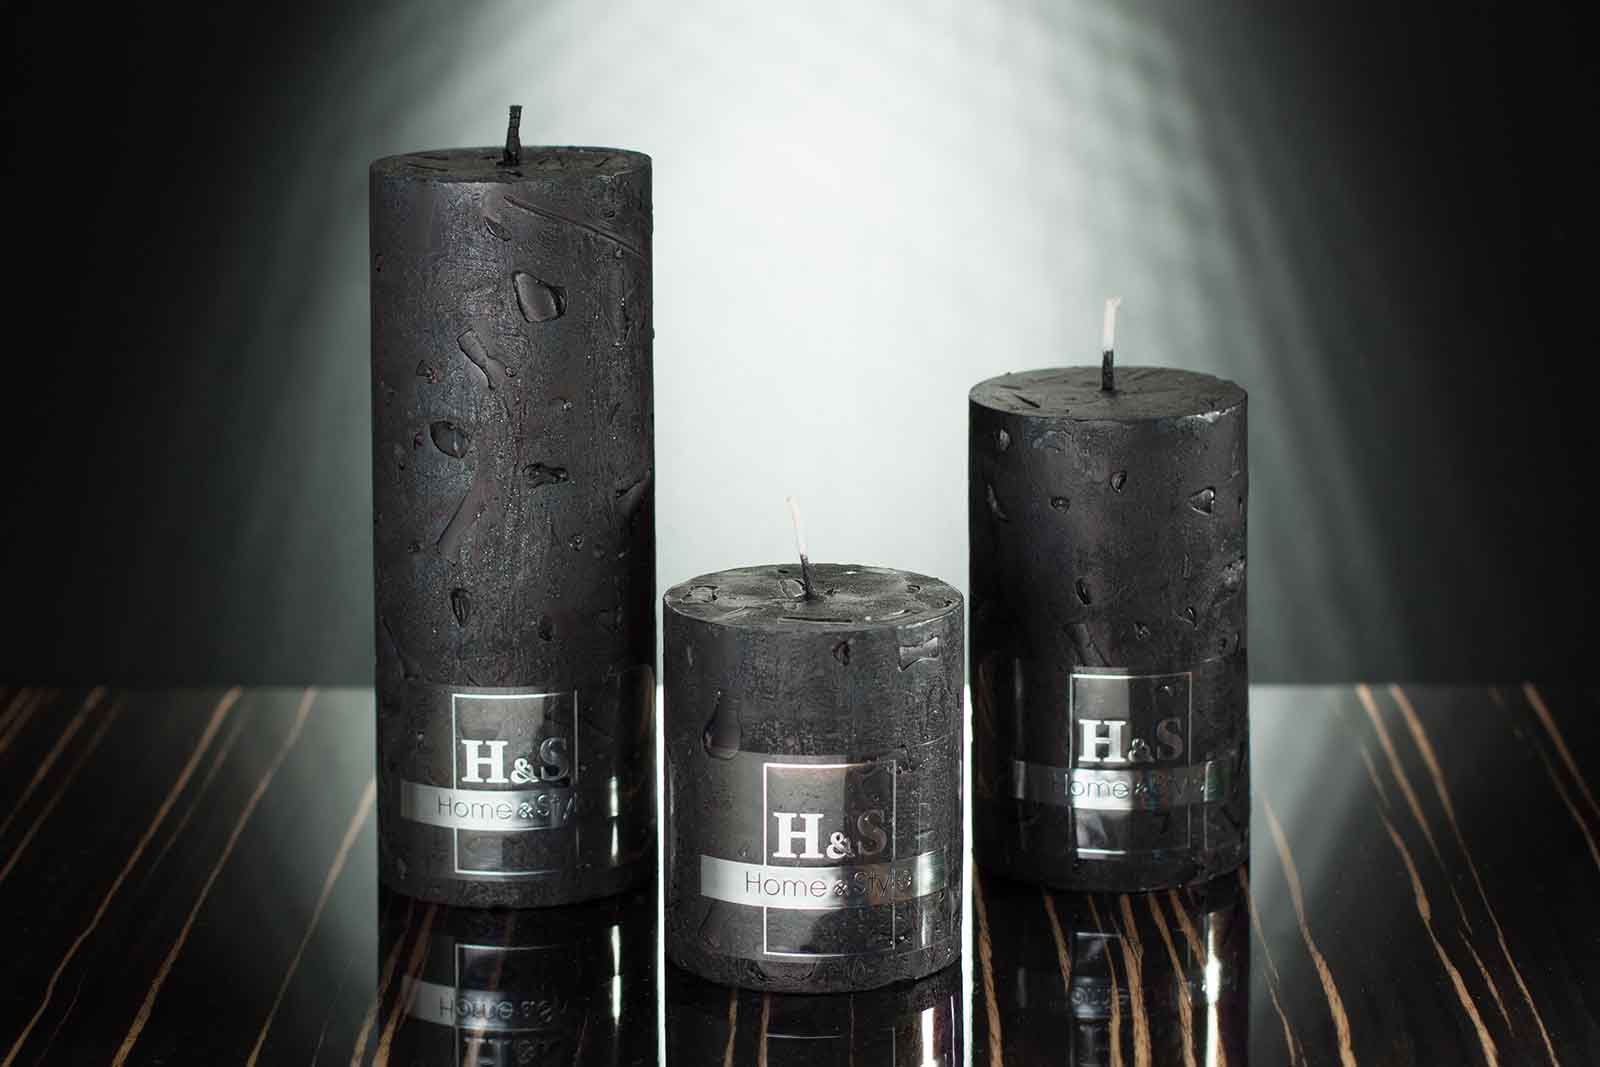 Three black rustic pillar candles sitting on the black worktop with brown stripes